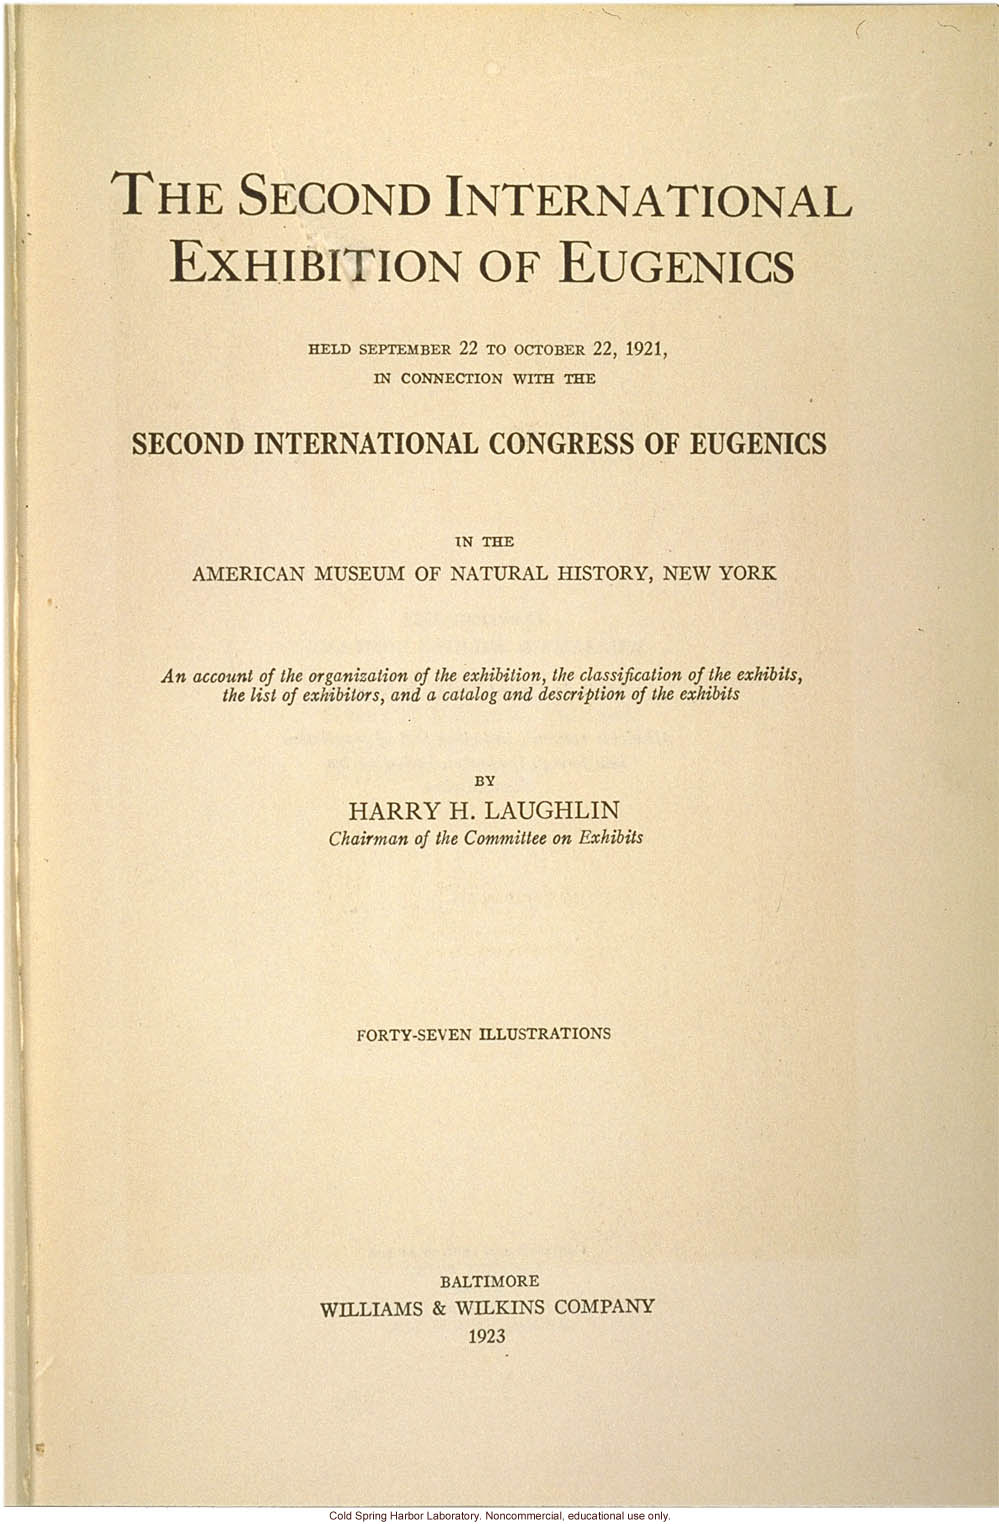 &quote;The Second International Exhibition of Eugenics, Sept. 22 -  Oct. 22, 1921 in the American Museum of Natural History, by H. Laughlin,&quote; title page